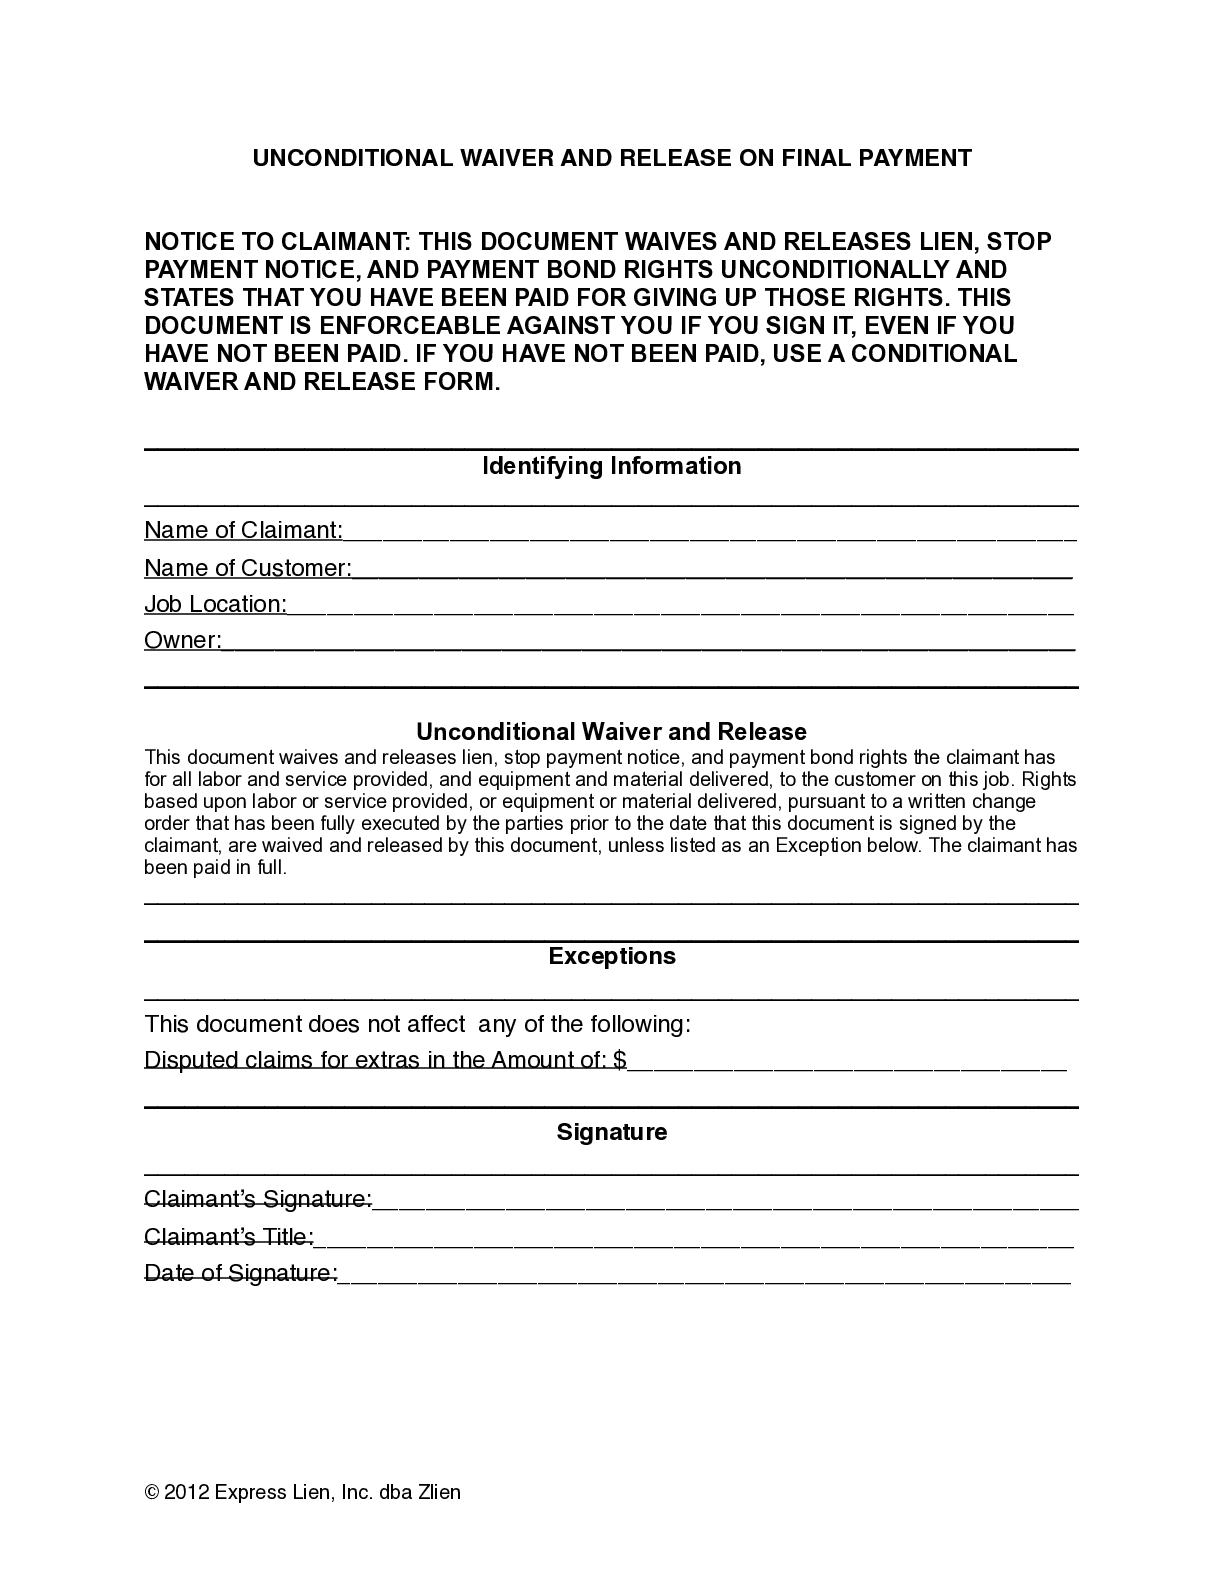 Louisiana Final Unconditional Lien Waiver Form - free from